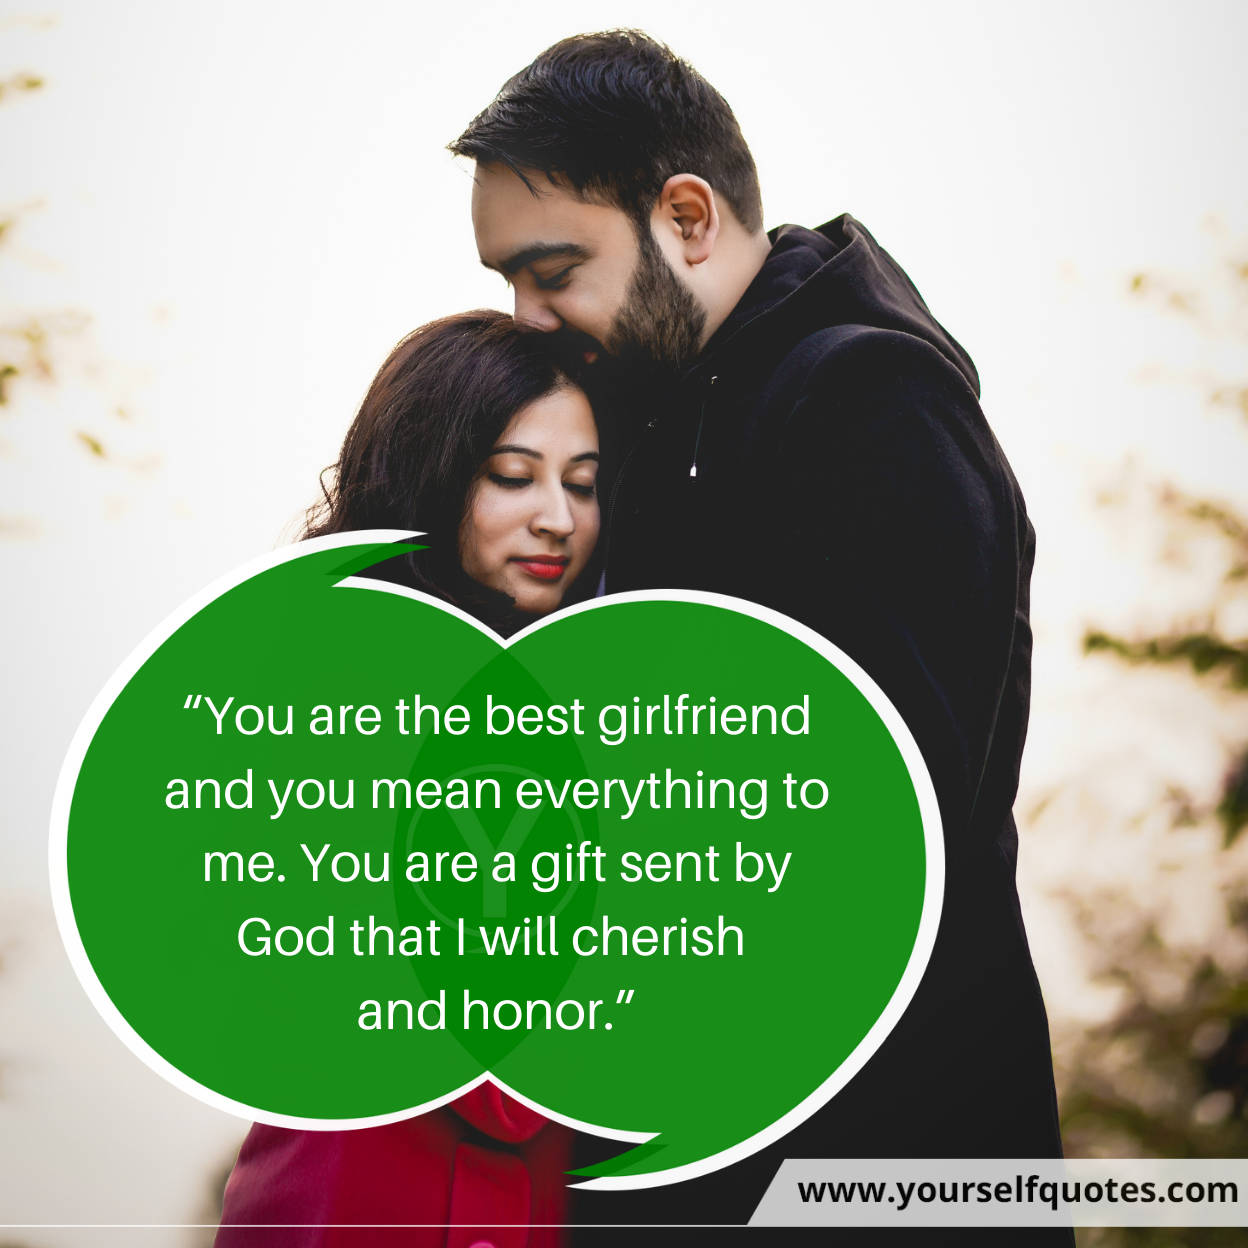 Girlfriend Quotes To Make Your Girl Feel Overwhelmed.